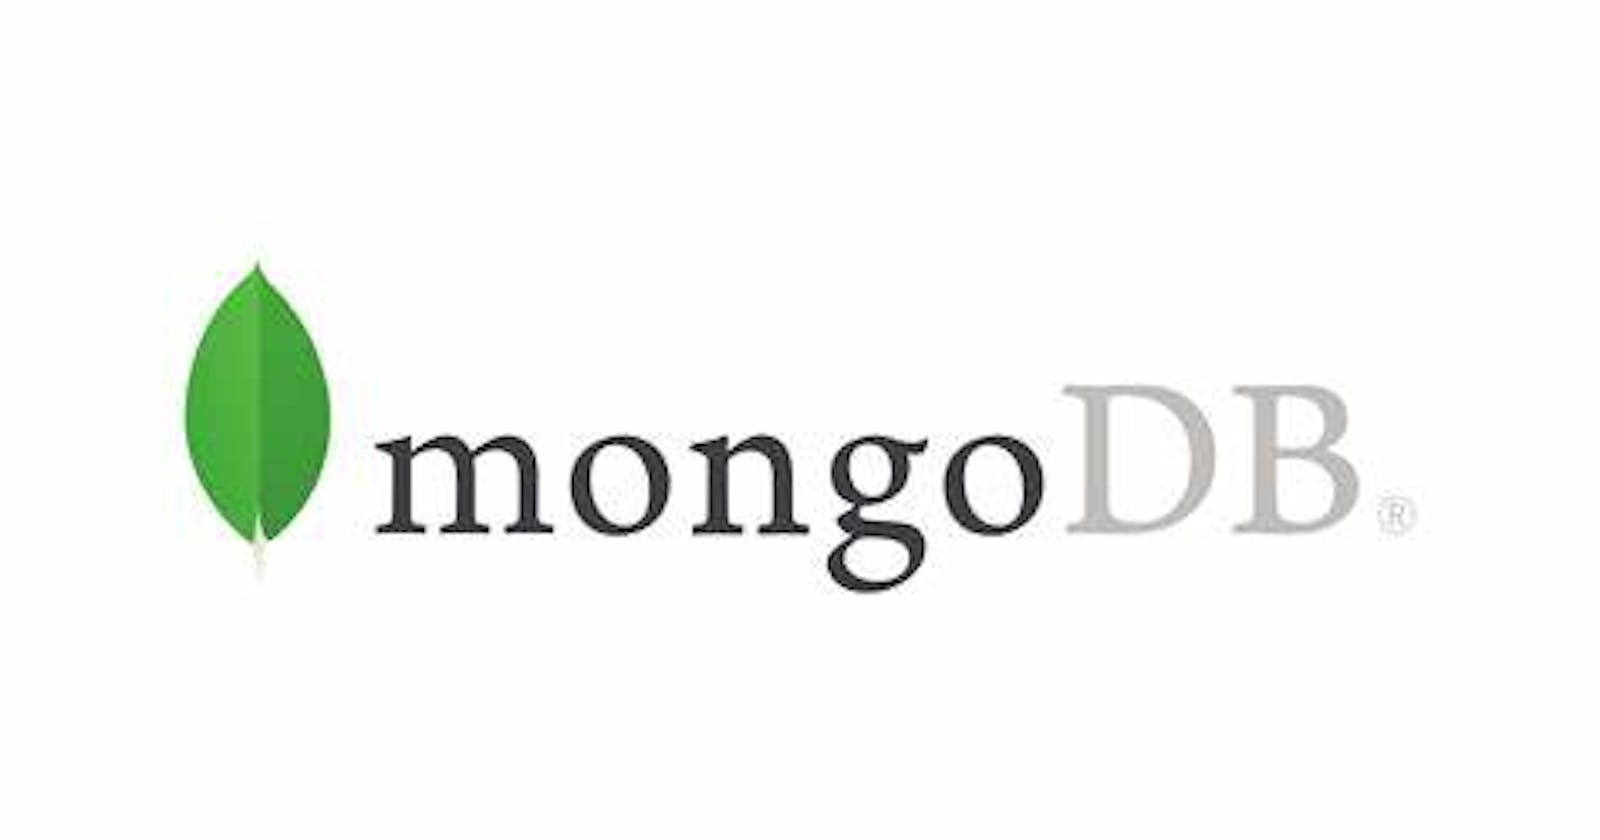 How to add images in MongoDB using Mongoose (without GridFS)